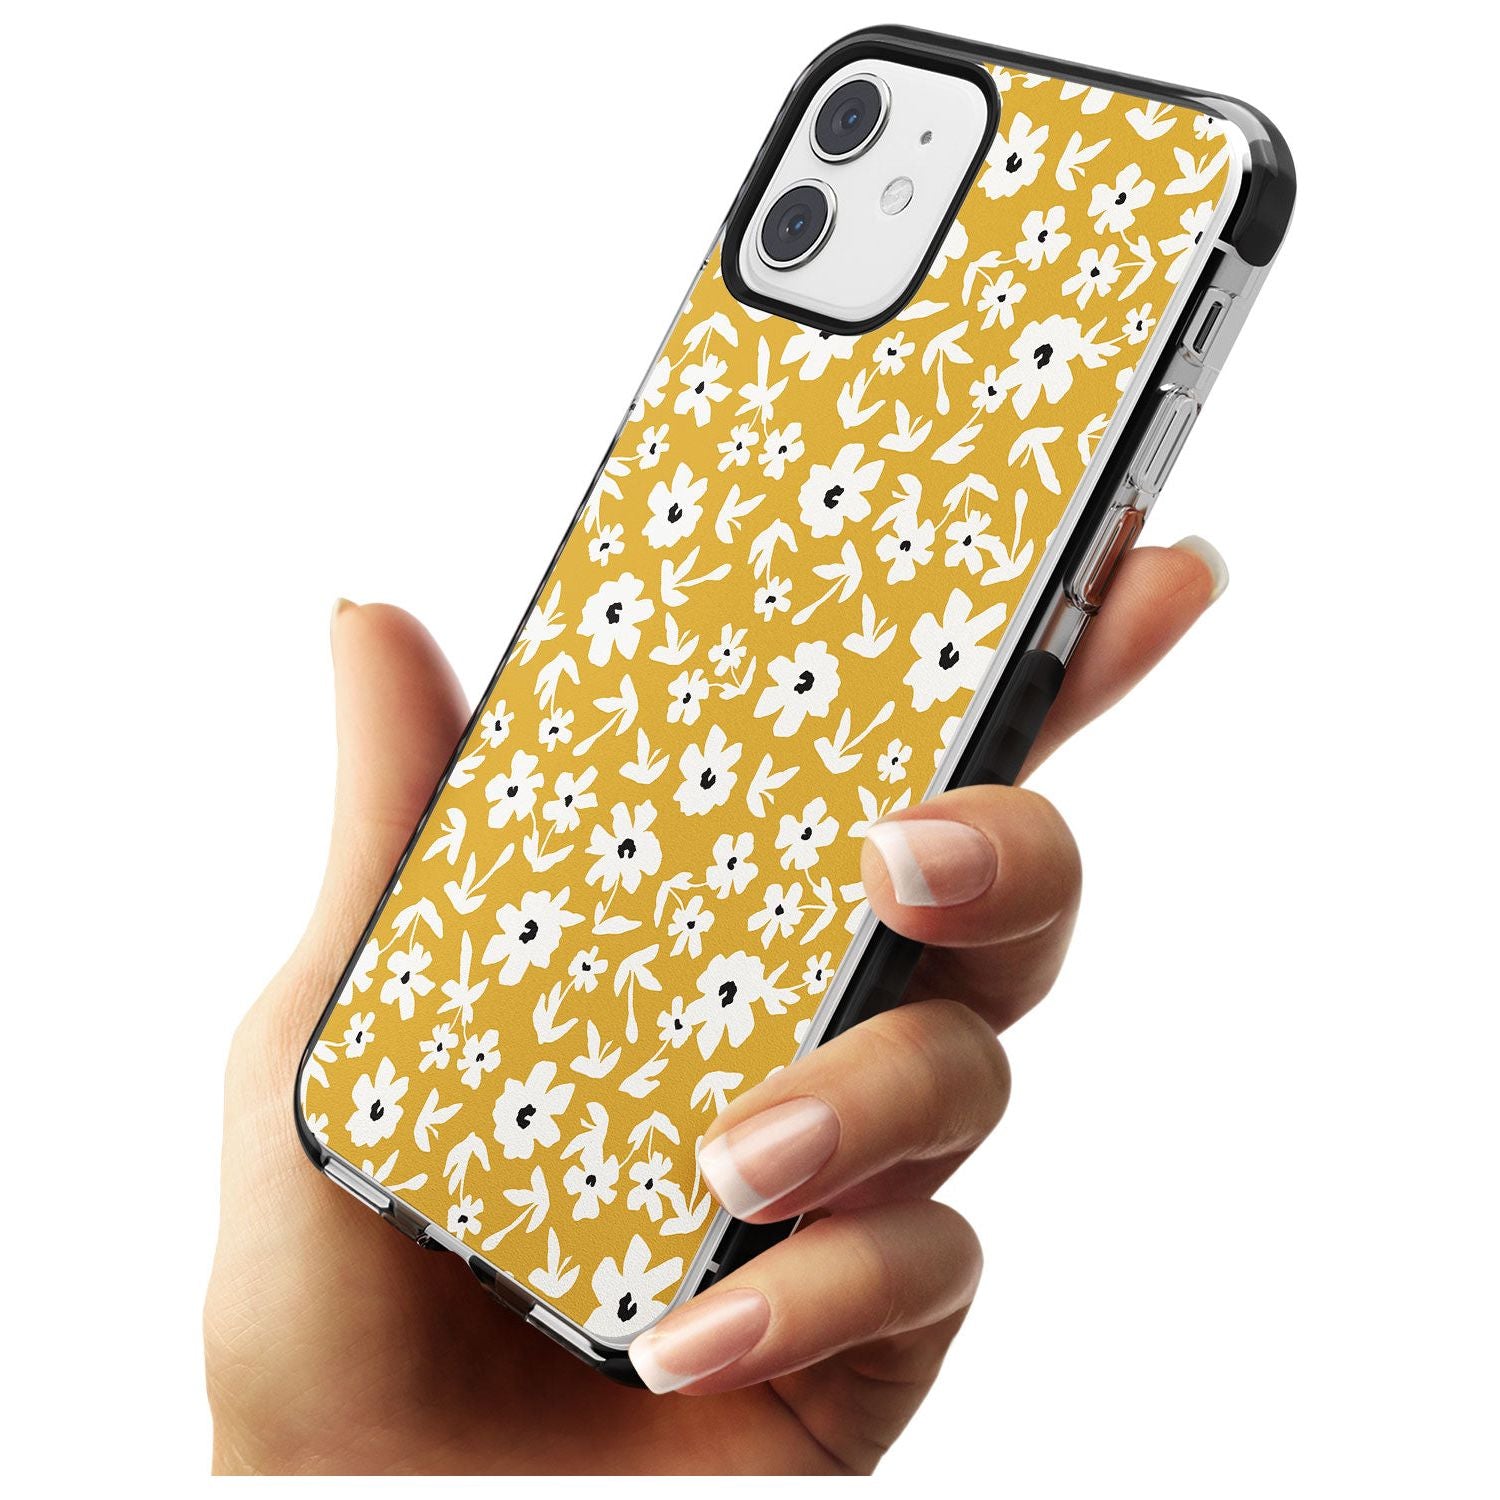 Floral Print on Mustard - Cute Floral Design Pink Fade Impact Phone Case for iPhone 11 Pro Max